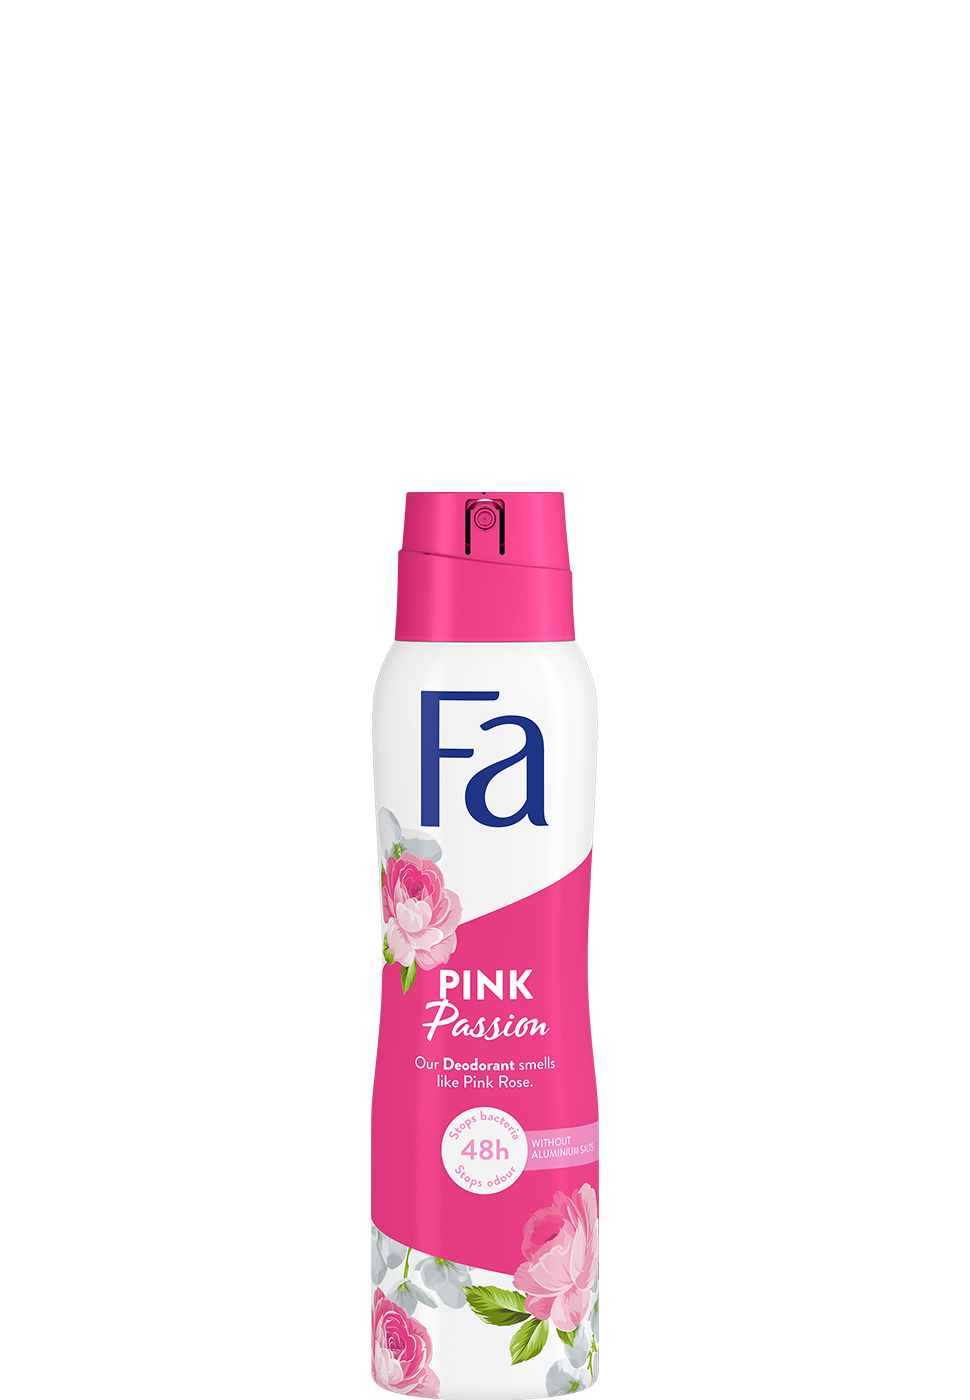 150 millilitre container of fa pink passion deodorant spray